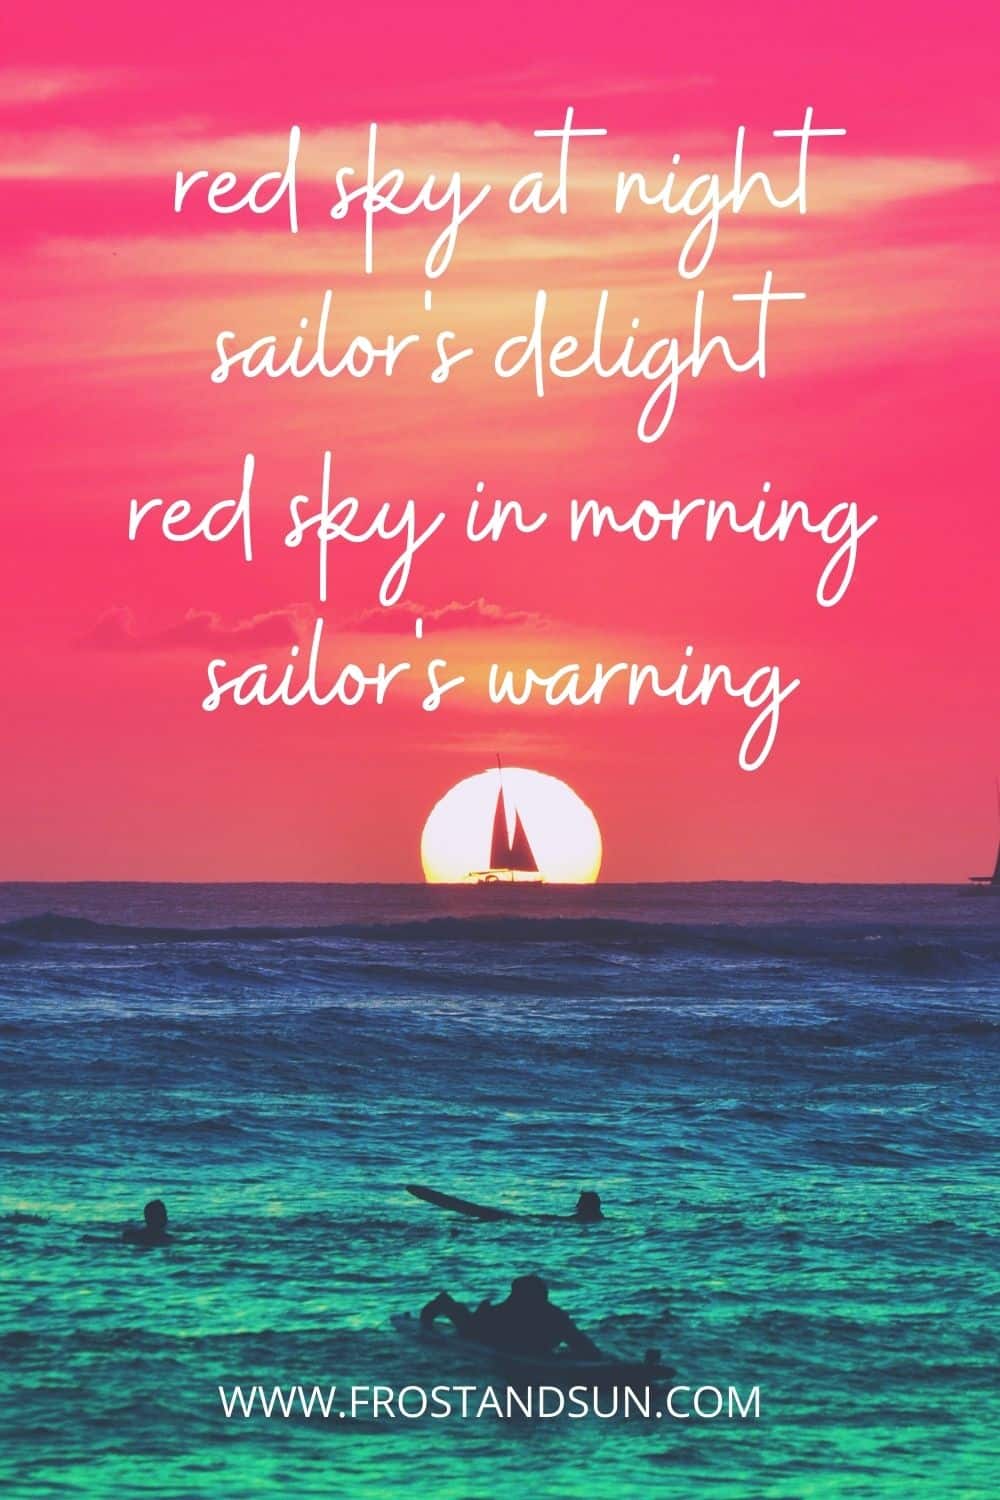 Photo of the ocean with people swimming in the foreground and a sailboat in the background with a bright red sky. Text at the top reads: Red sky at night, sailor's delight. Red sky in the morning, sailor's warning.